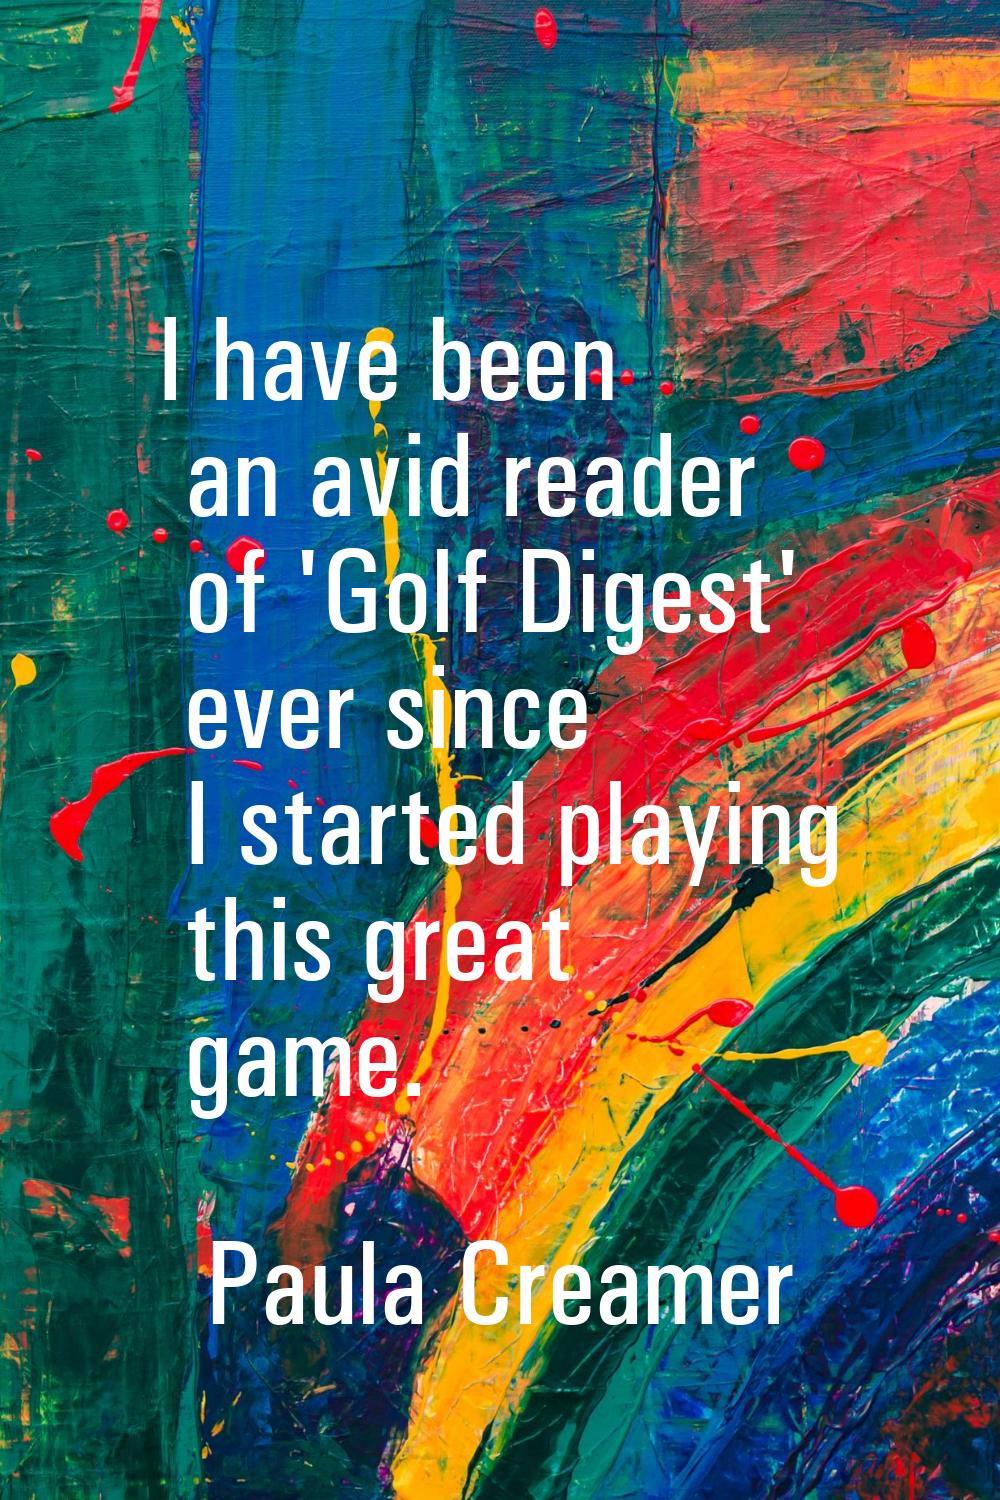 I have been an avid reader of 'Golf Digest' ever since I started playing this great game.